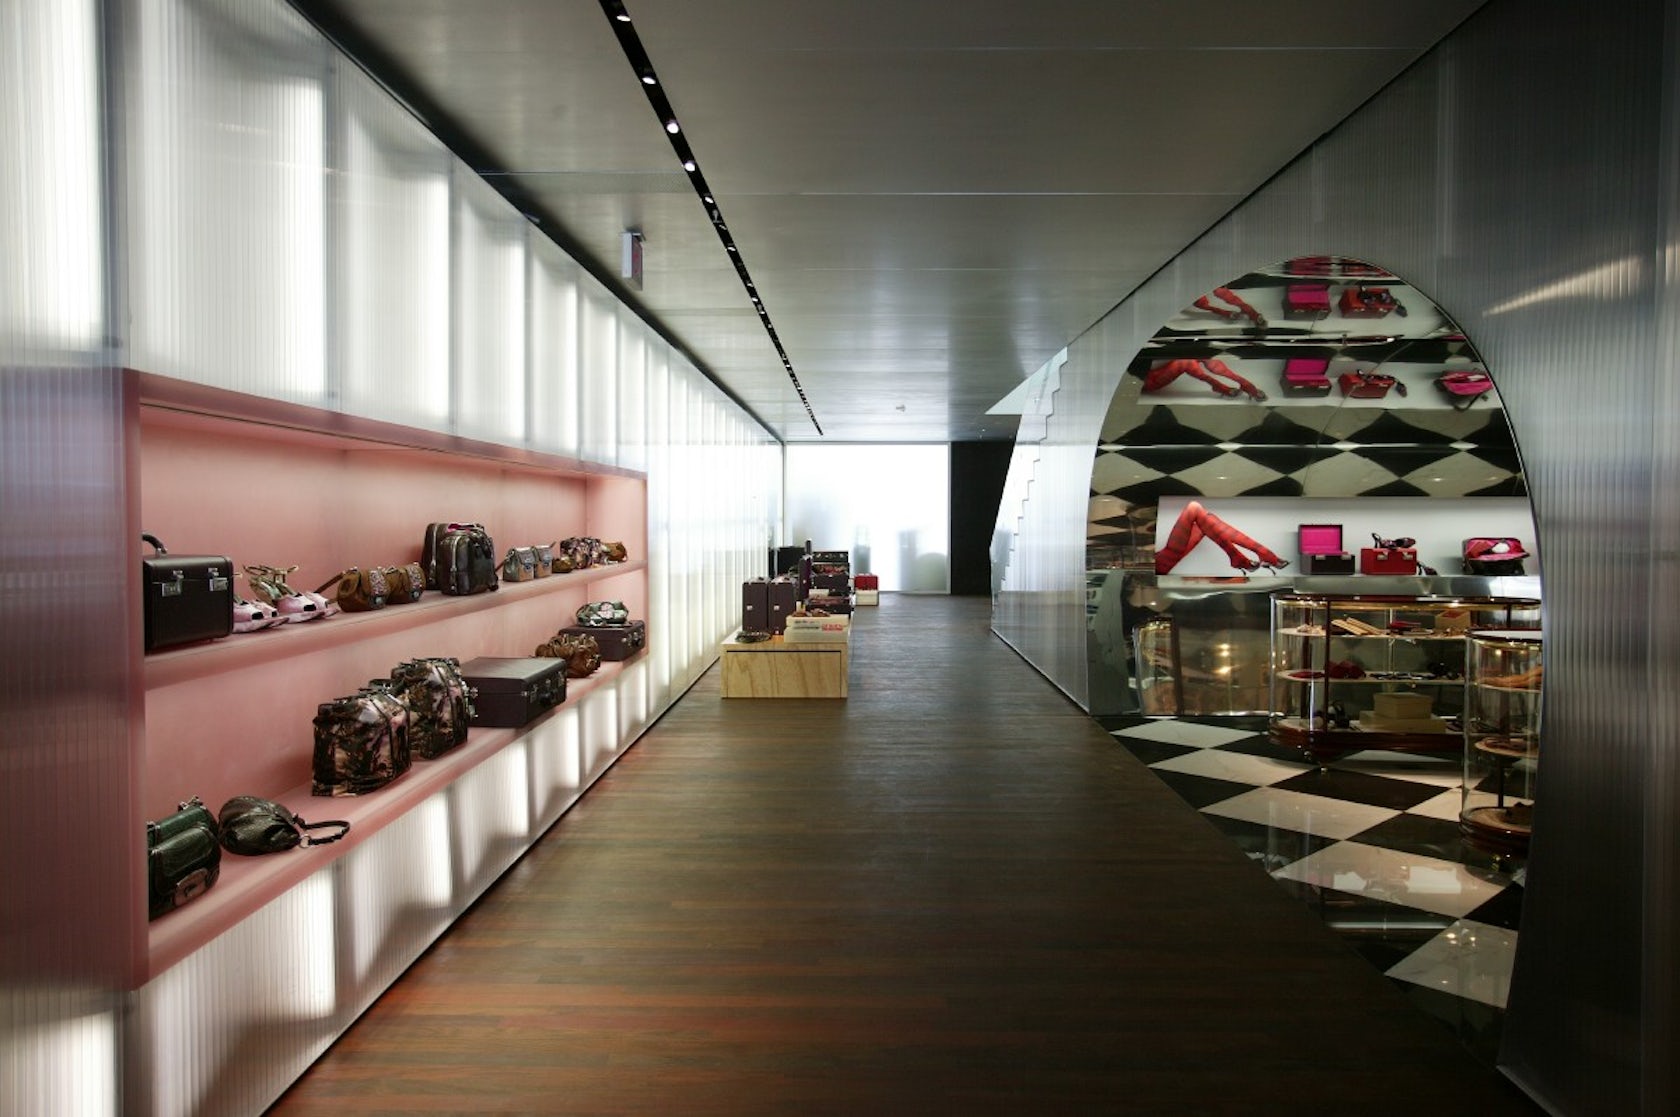 Interior shots of the new PRADA store on Rodeo Drive July 15, 2004 in